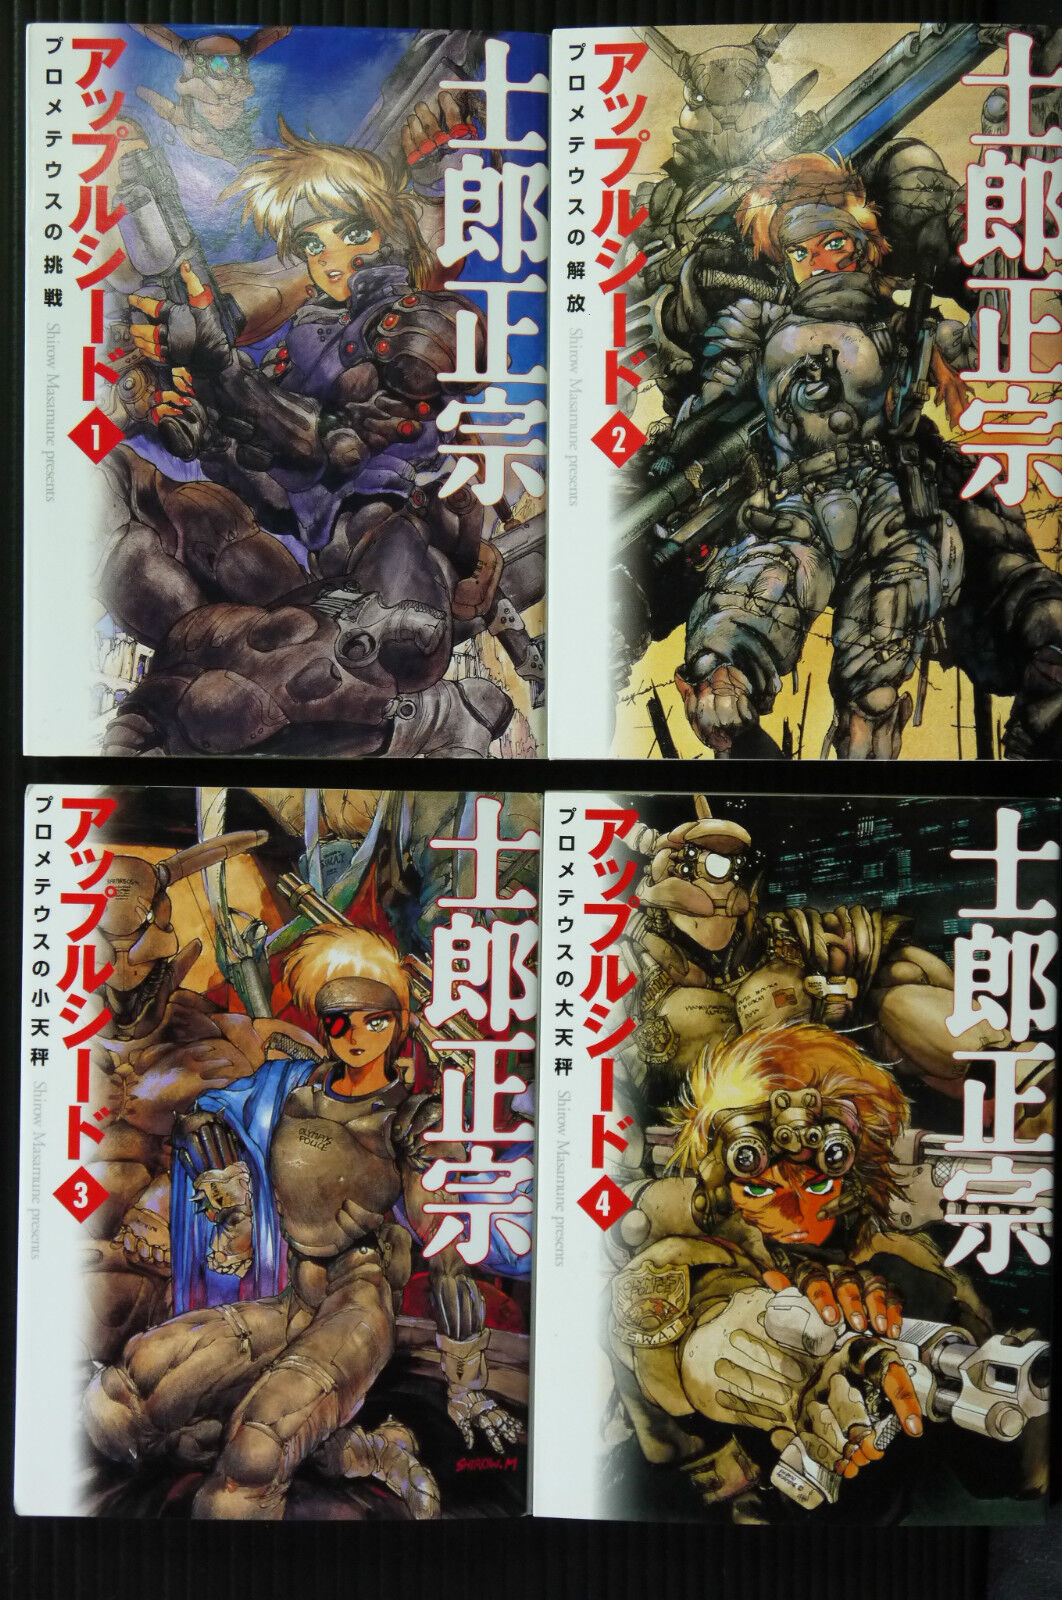 Masamune Shirow's Appleseed: Manga vol.1-4 Complete Set from Japan